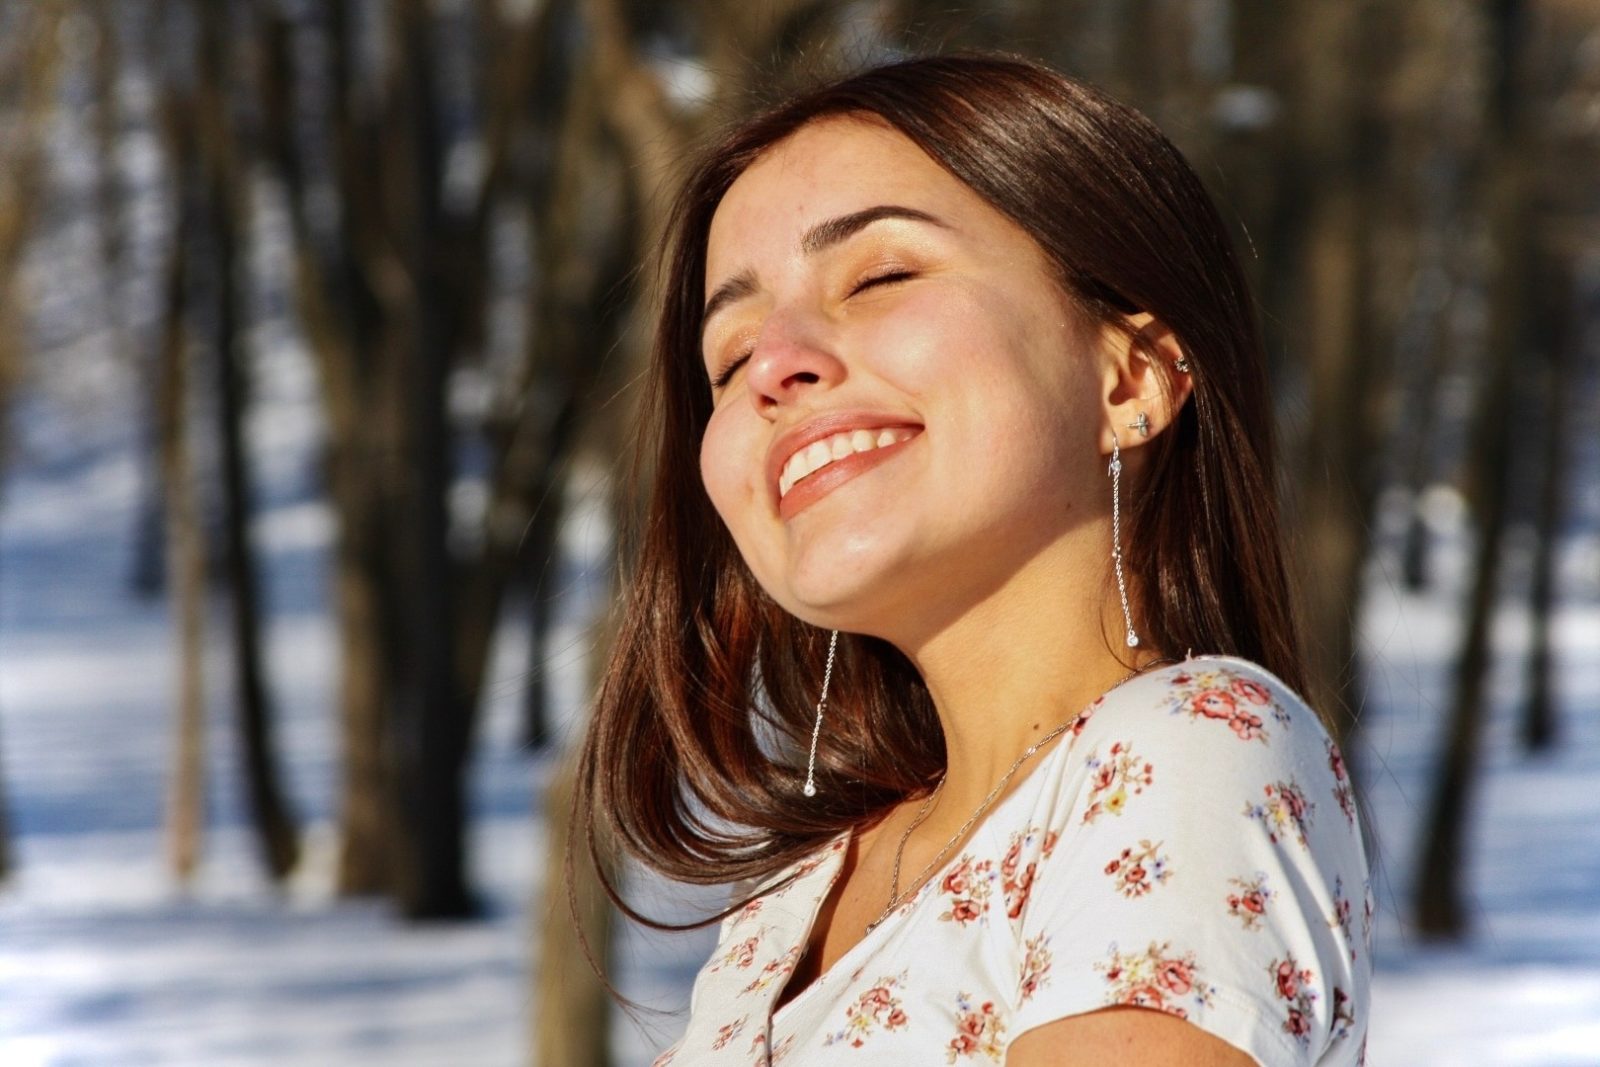 Should Your Skincare Routine Change During Winter? Yes & Here’s Why